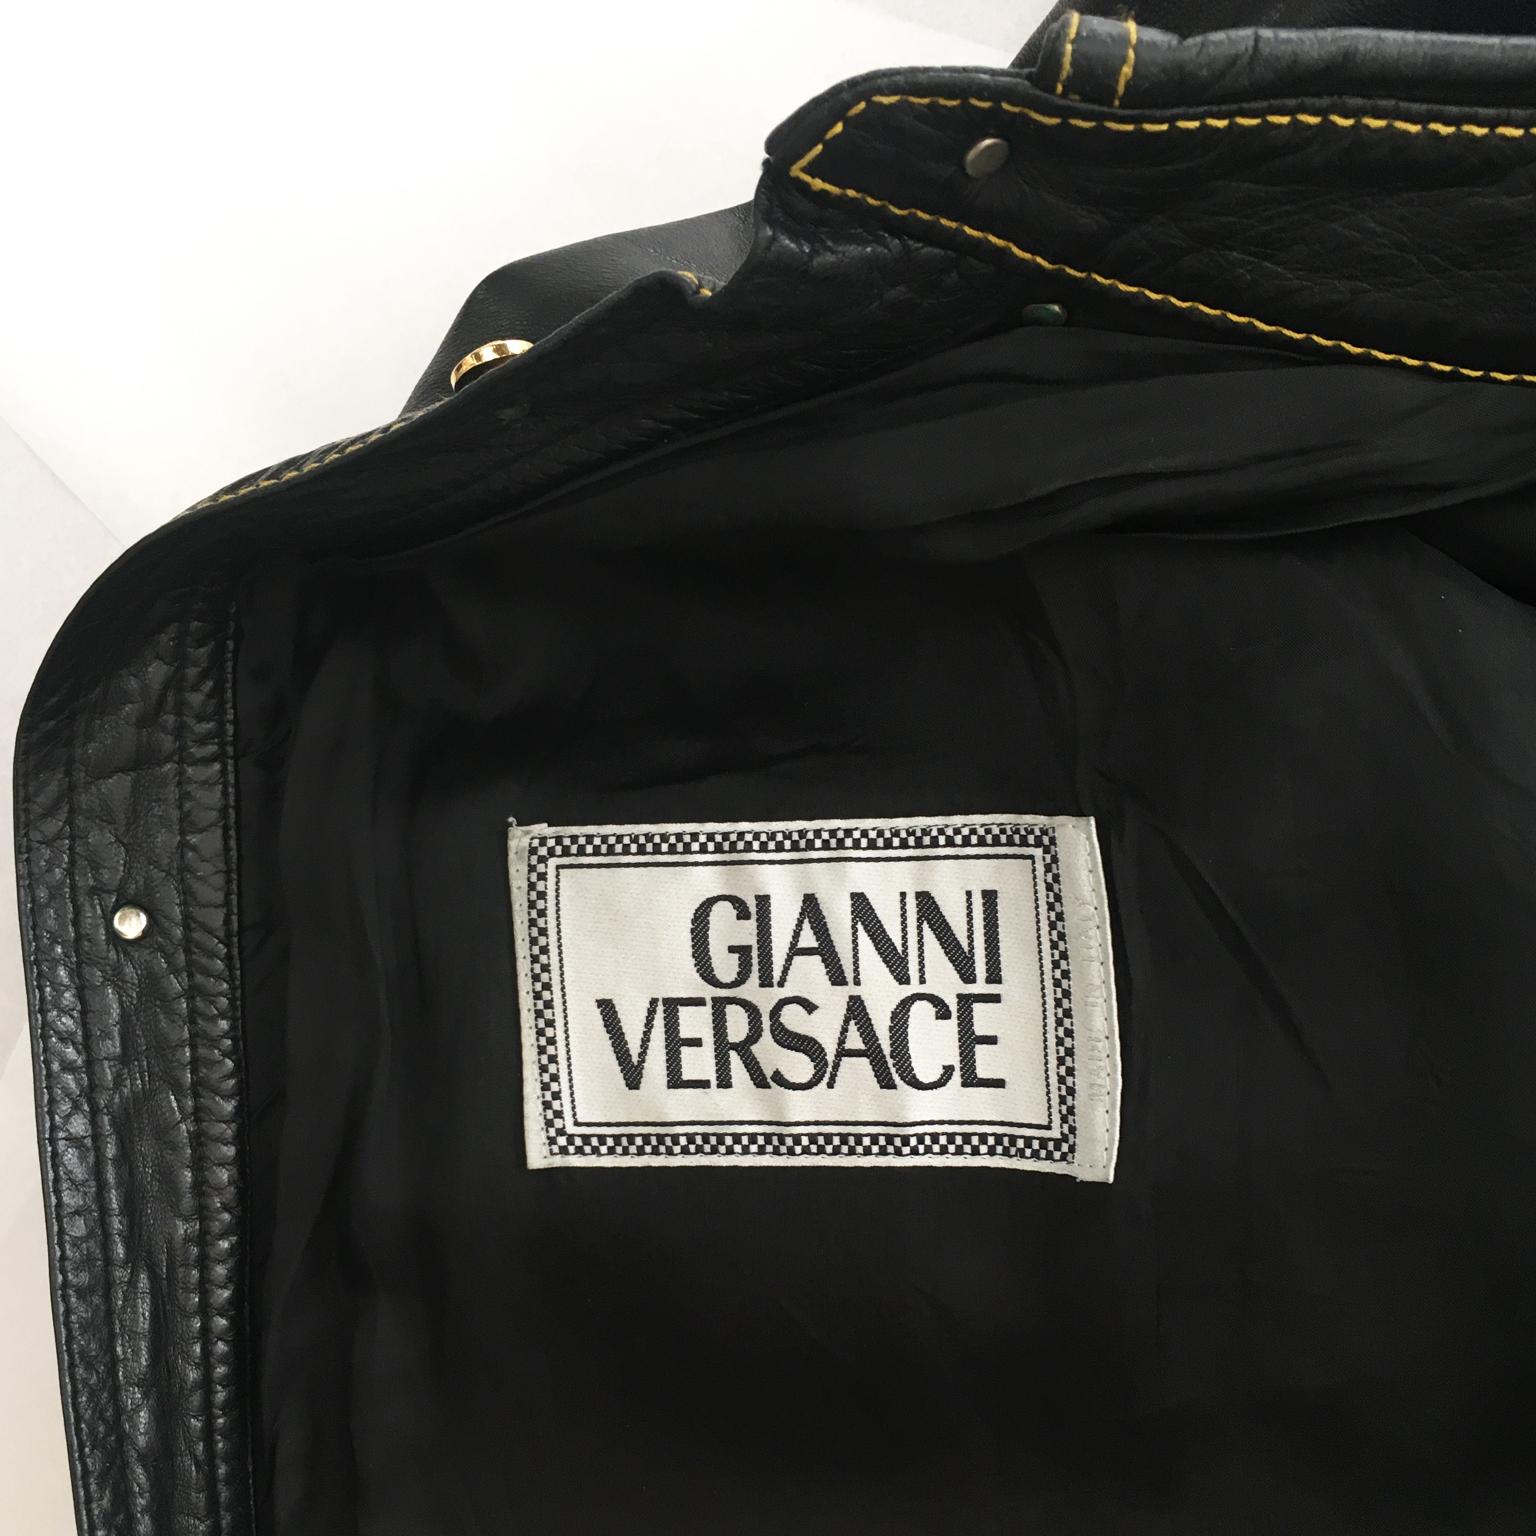 Men's Gianni Versace Black Leather Signature Shirt SS 1993 For Sale